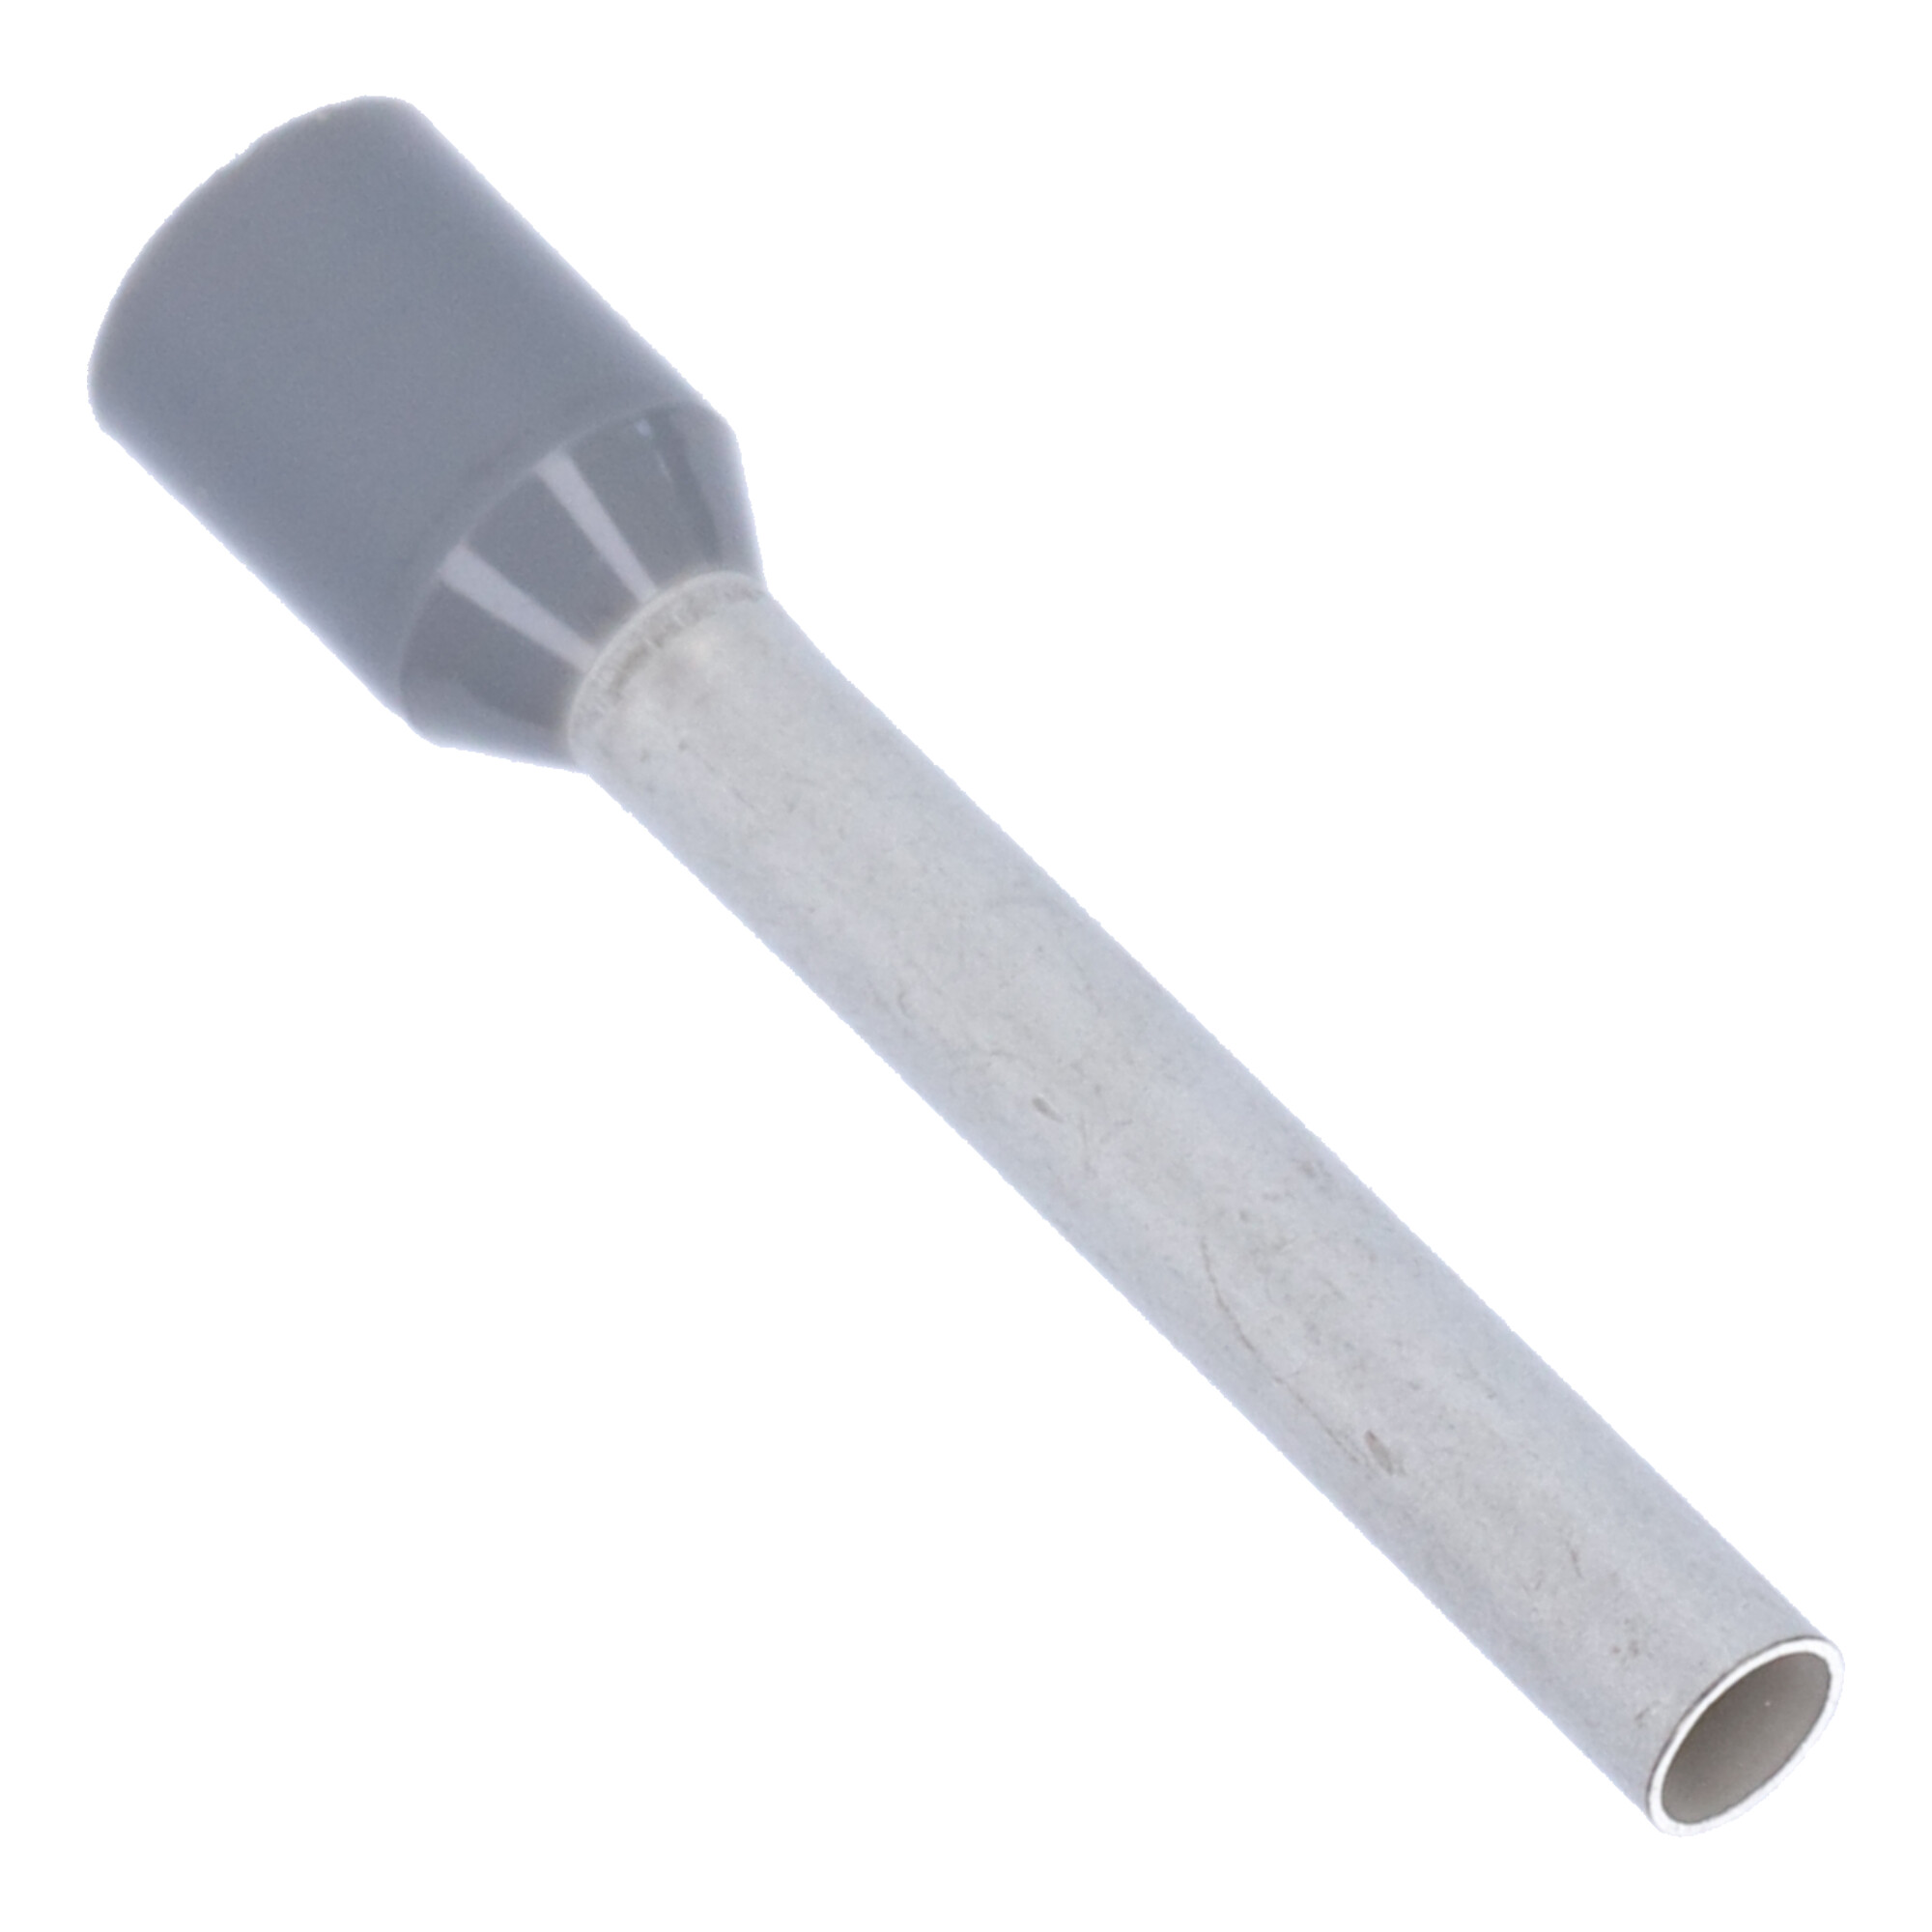 15-00185 Insulated wire end sleeve